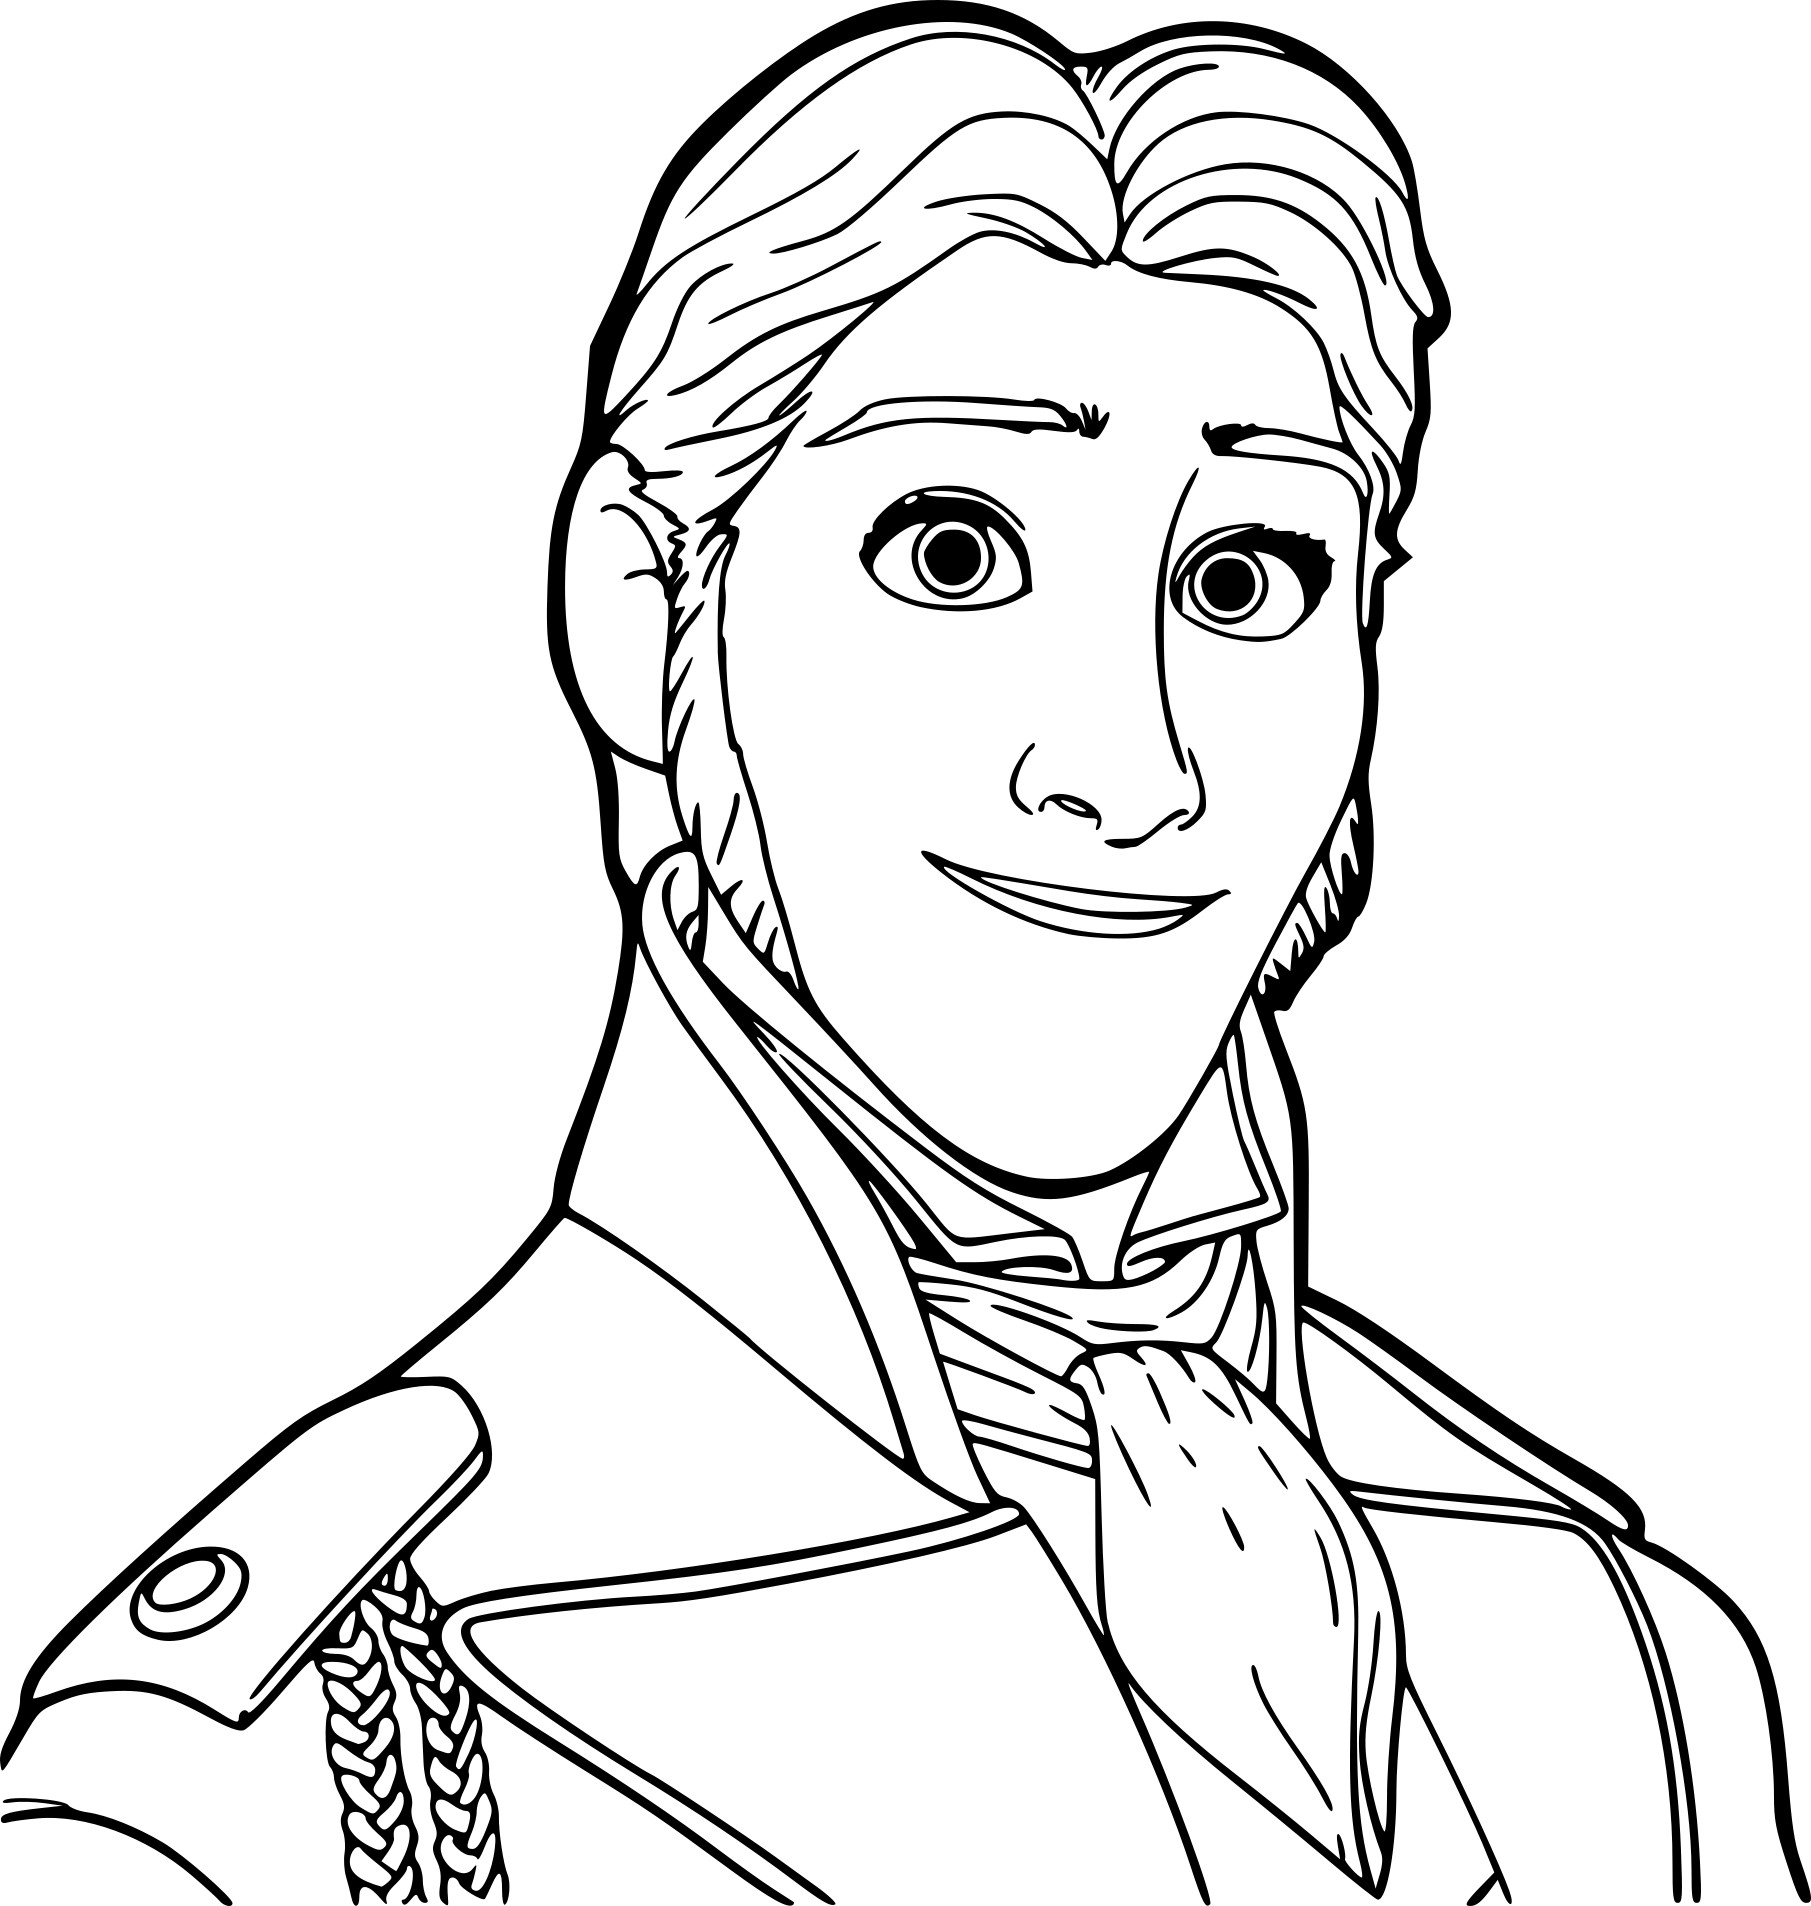 Prince Hans drawing and coloring page